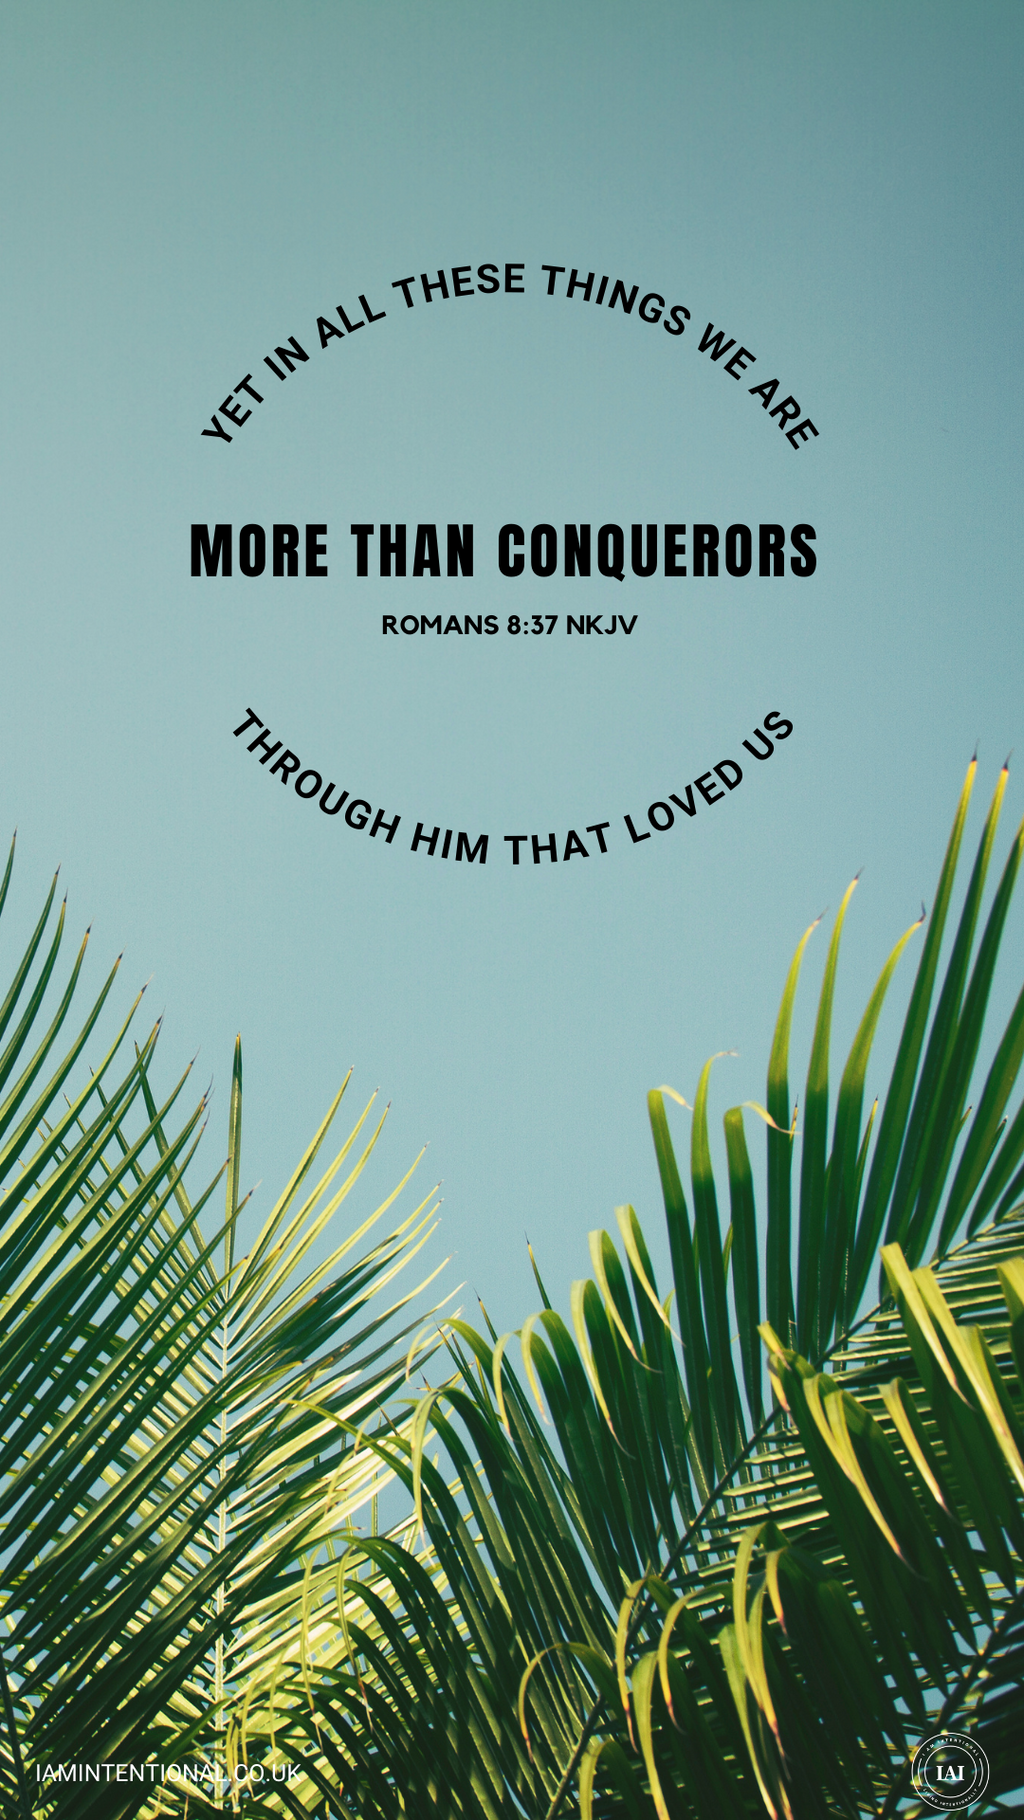 More than conquerors - I AM INTENTIONAL 